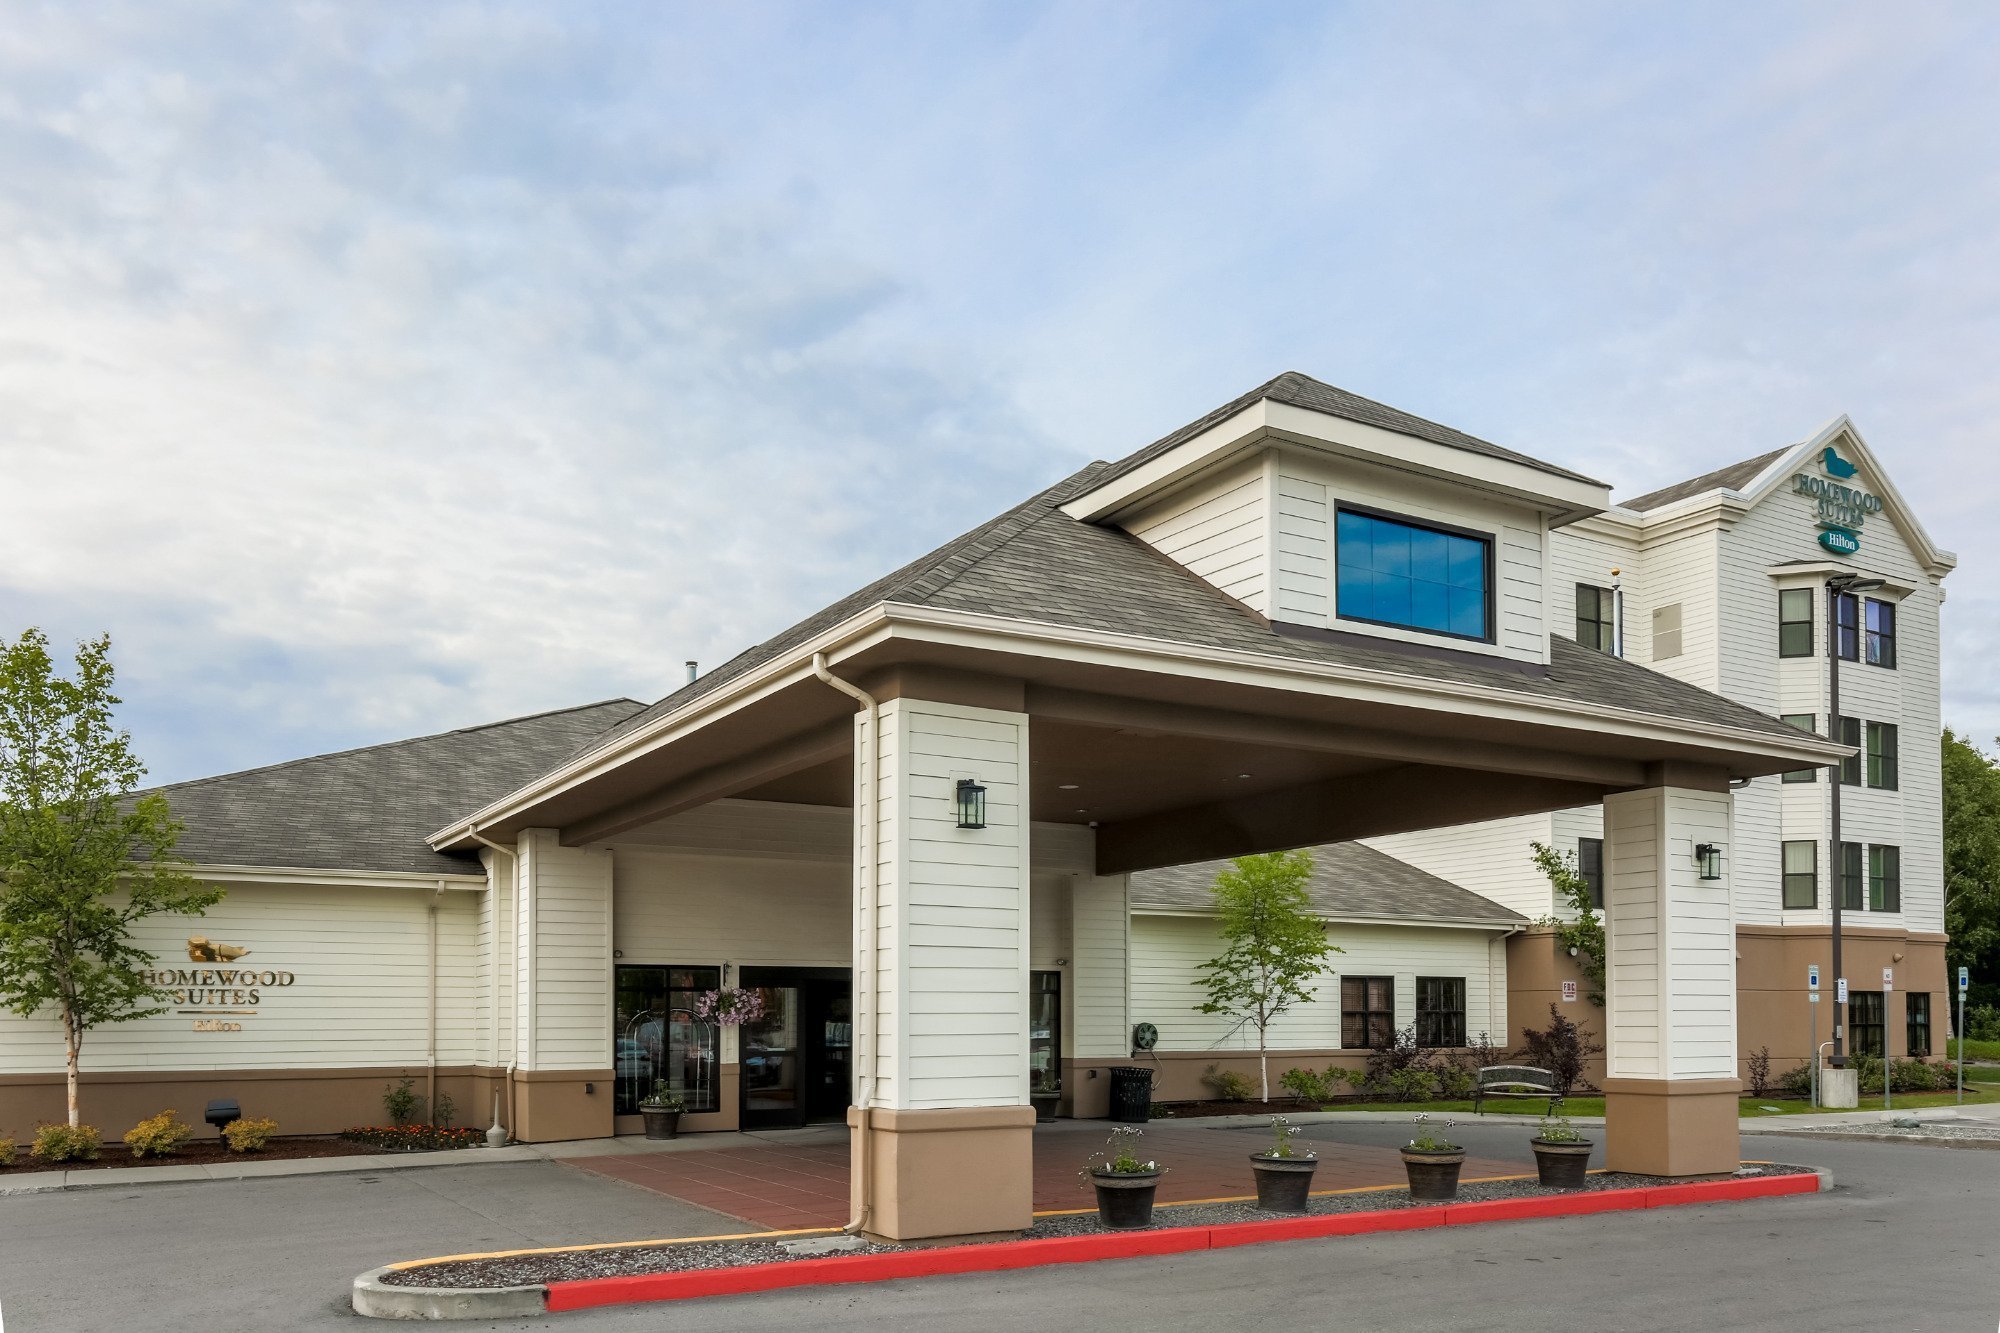 Photo of Homewood Suites by Hilton Anchorage, Anchorage, AK